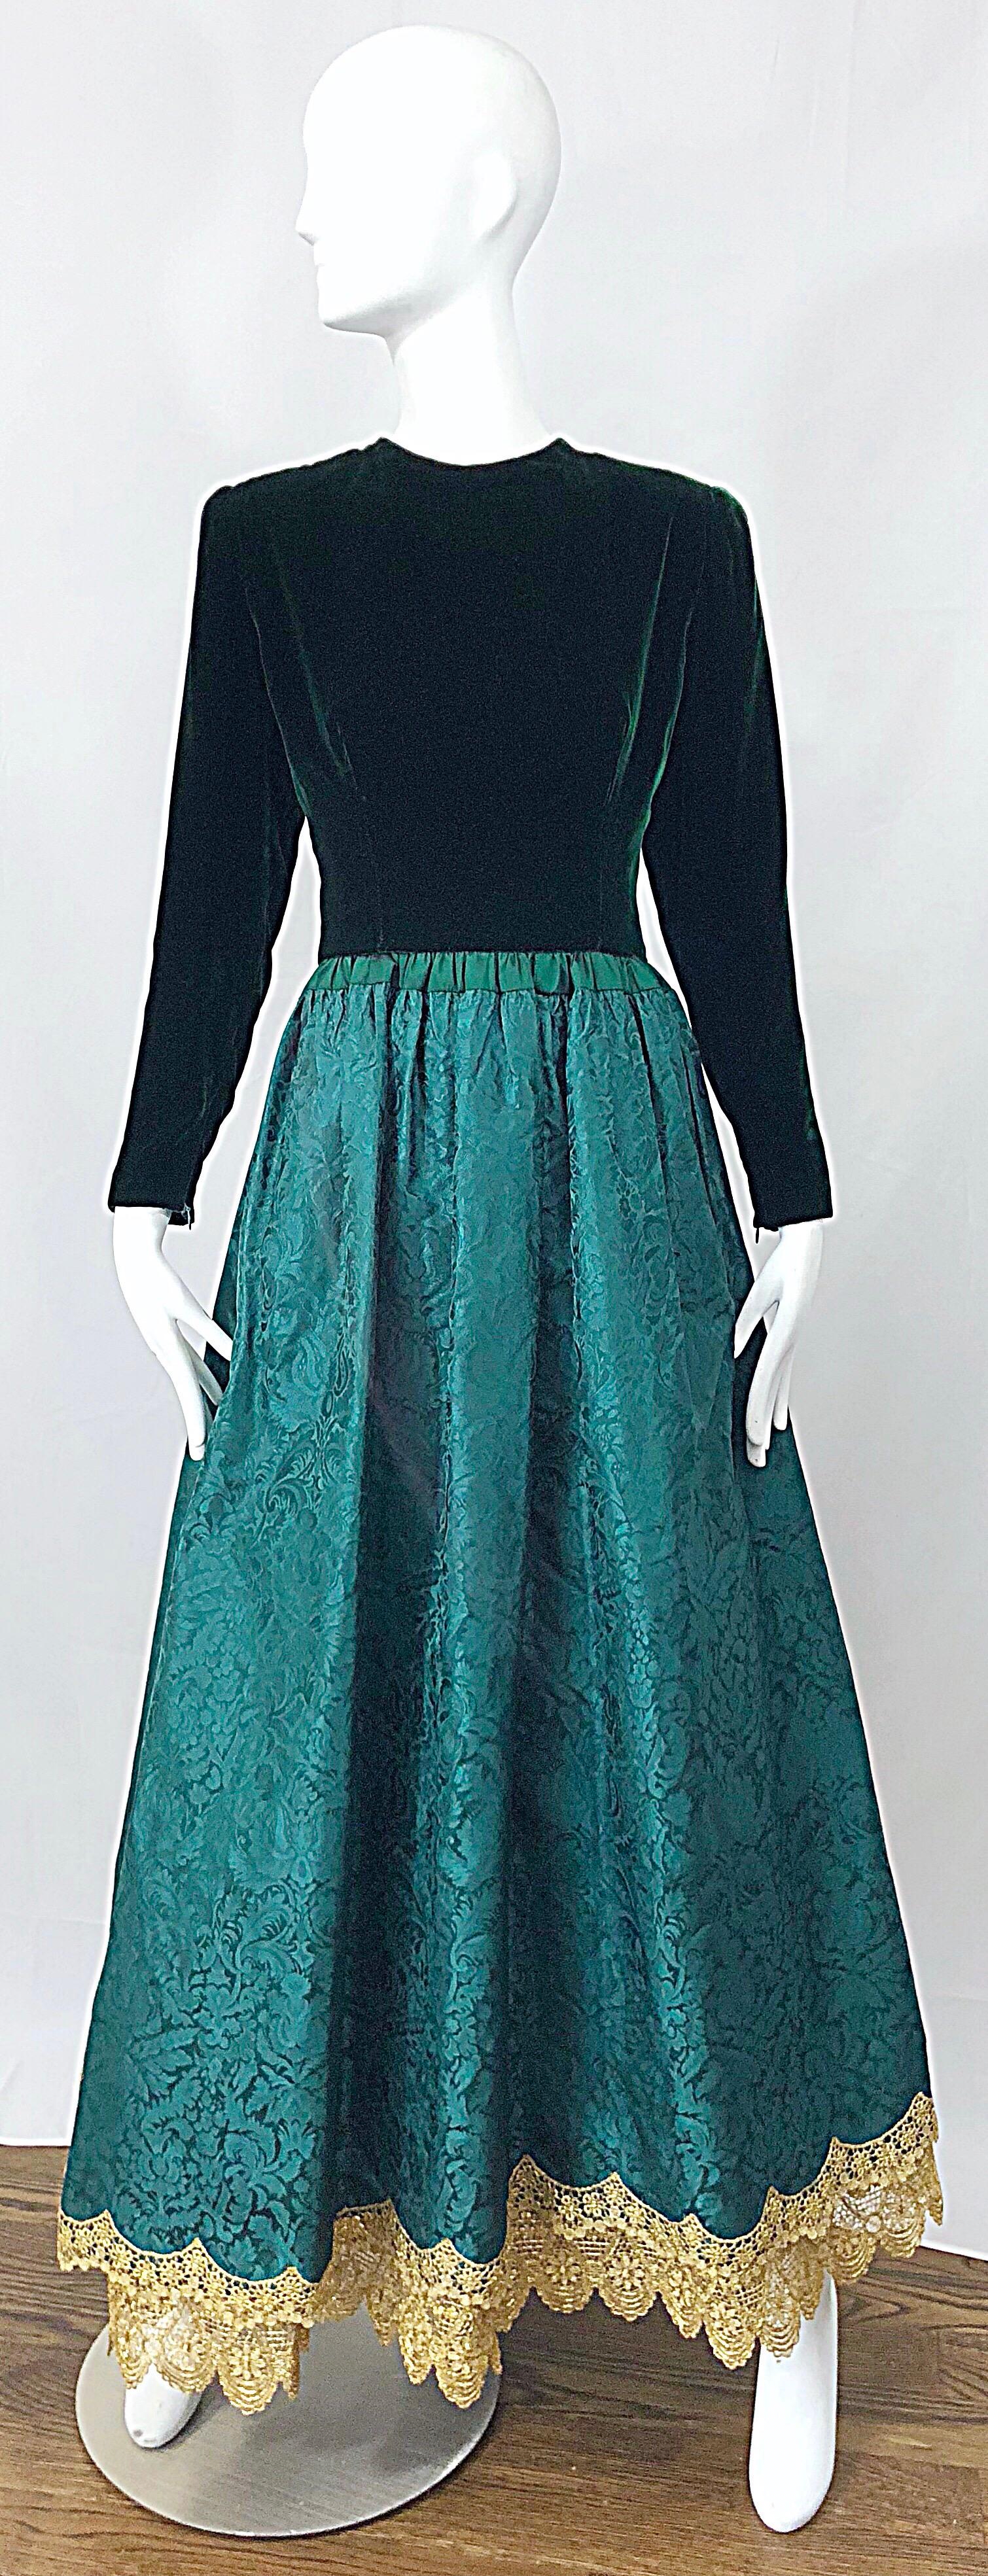 Stunning vintage OSCAR DE LA RENTA Couture Victorian inspired Size 8 forest hunter green velvet and silk damask full length evening dress! Features a luxurious hunter green velvet bodice that is impeccably tailored. Flattering forest green silk